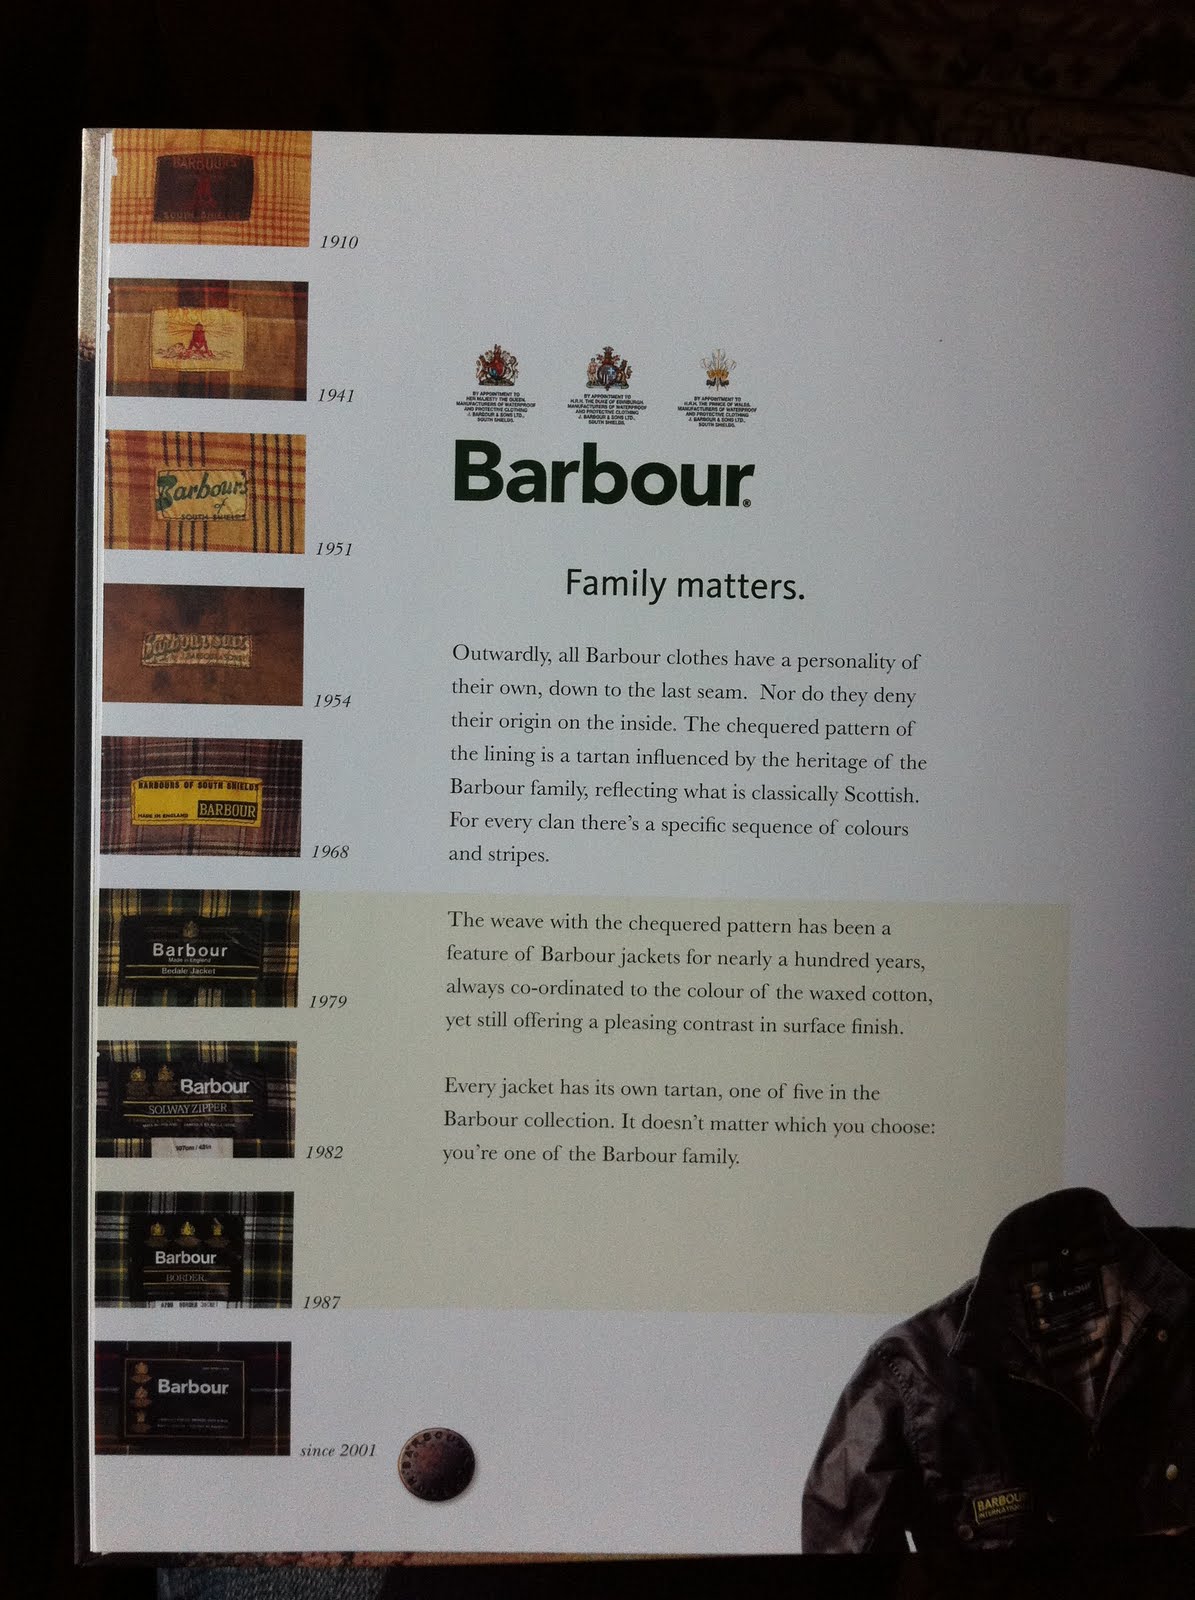 Thornproof: Barbour Family Matters